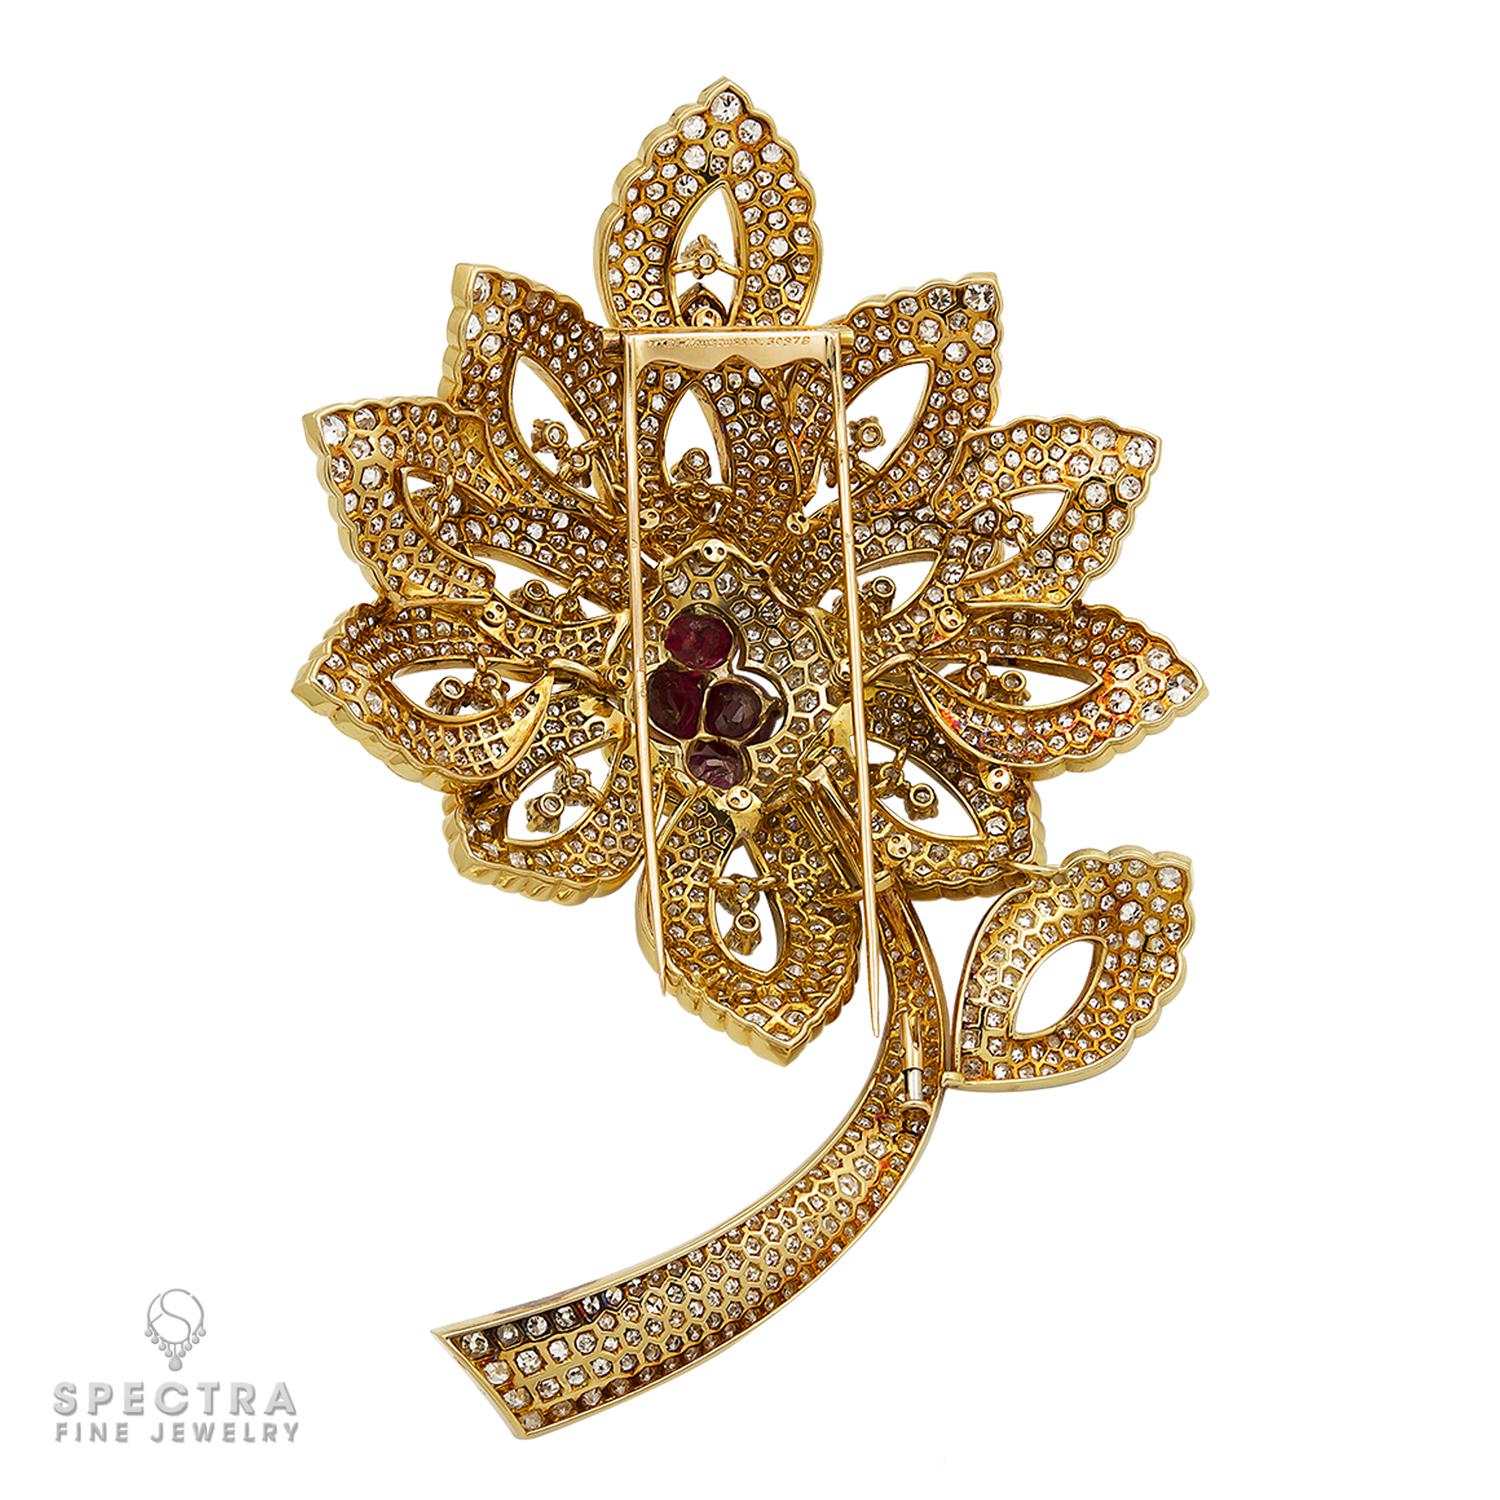 The Diamond Ruby Flower Brooch, signed by Mauboussin, is an exquisite piece of jewelry that showcases the brand's craftsmanship and attention to detail. This brooch is a true masterpiece, combining the timeless beauty of diamonds and rubies with the